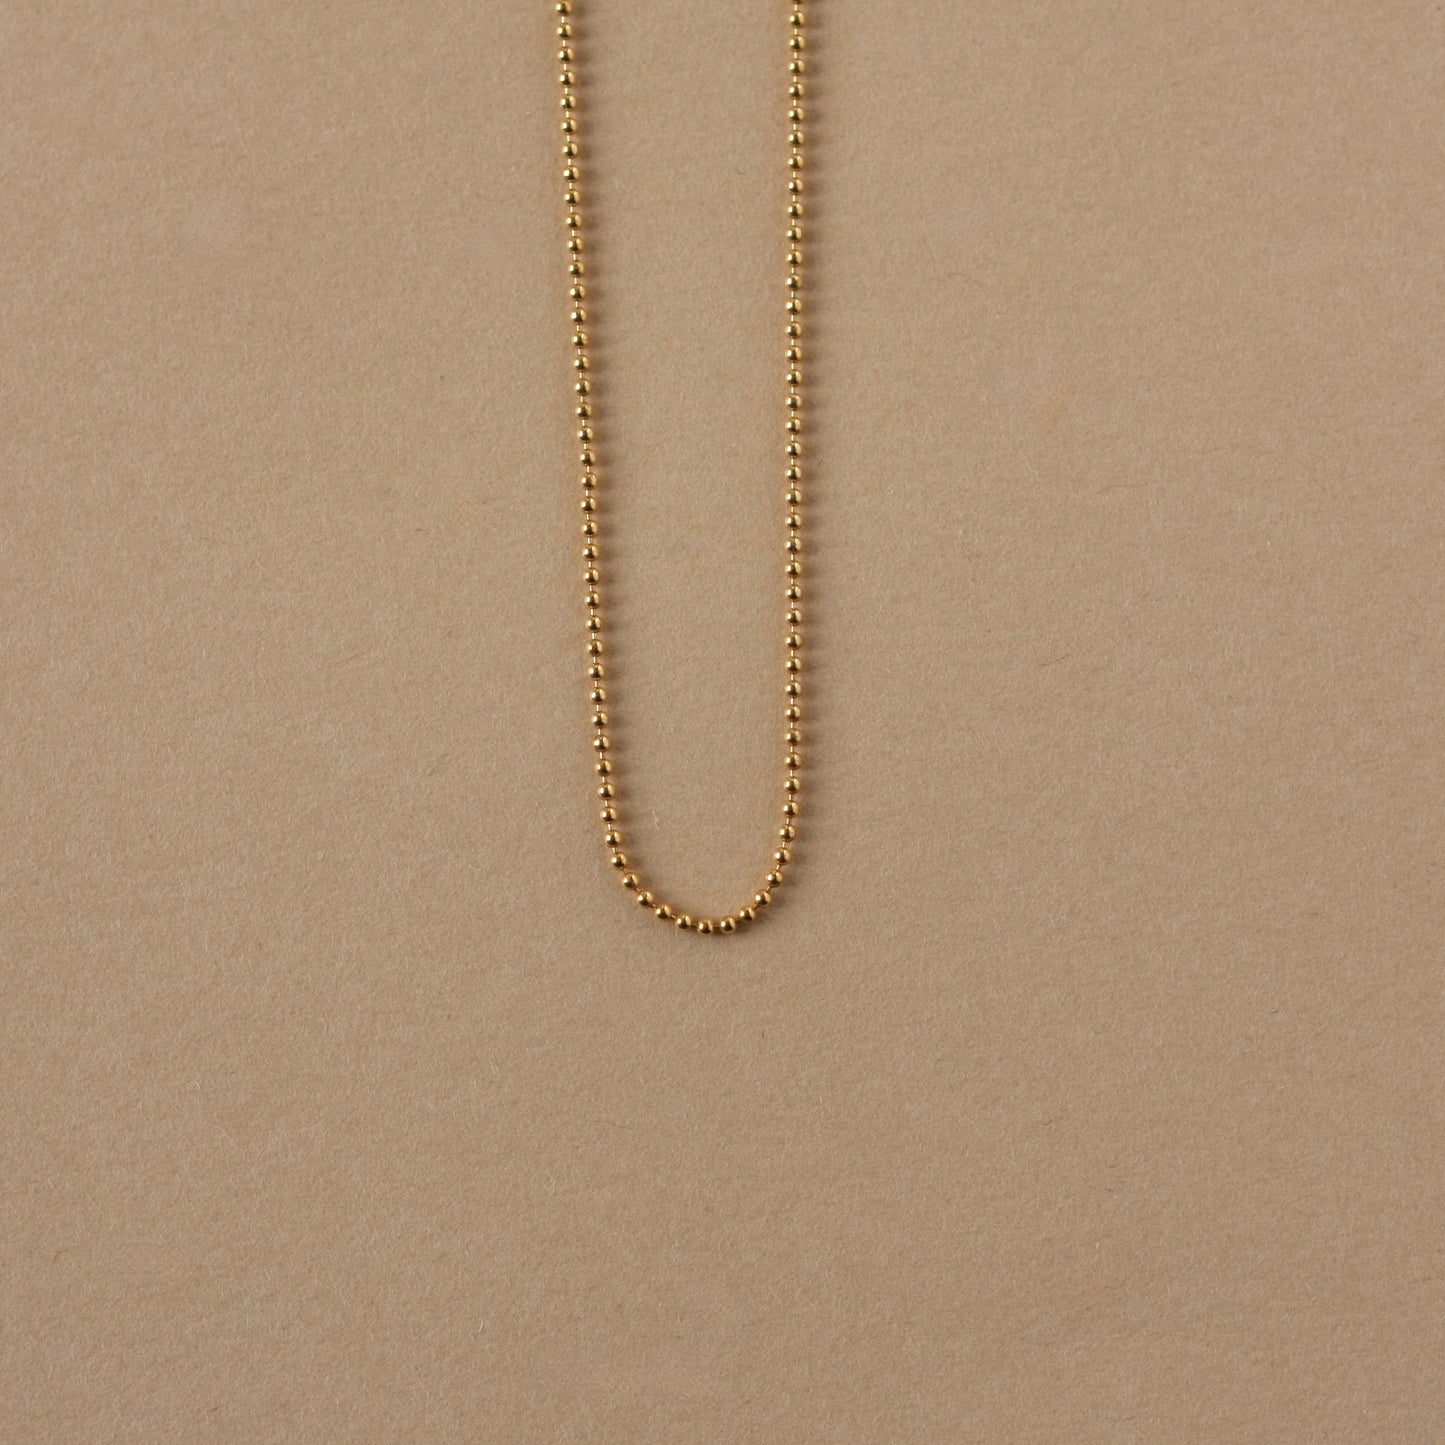 Dainty Gold Filled Ball Chain